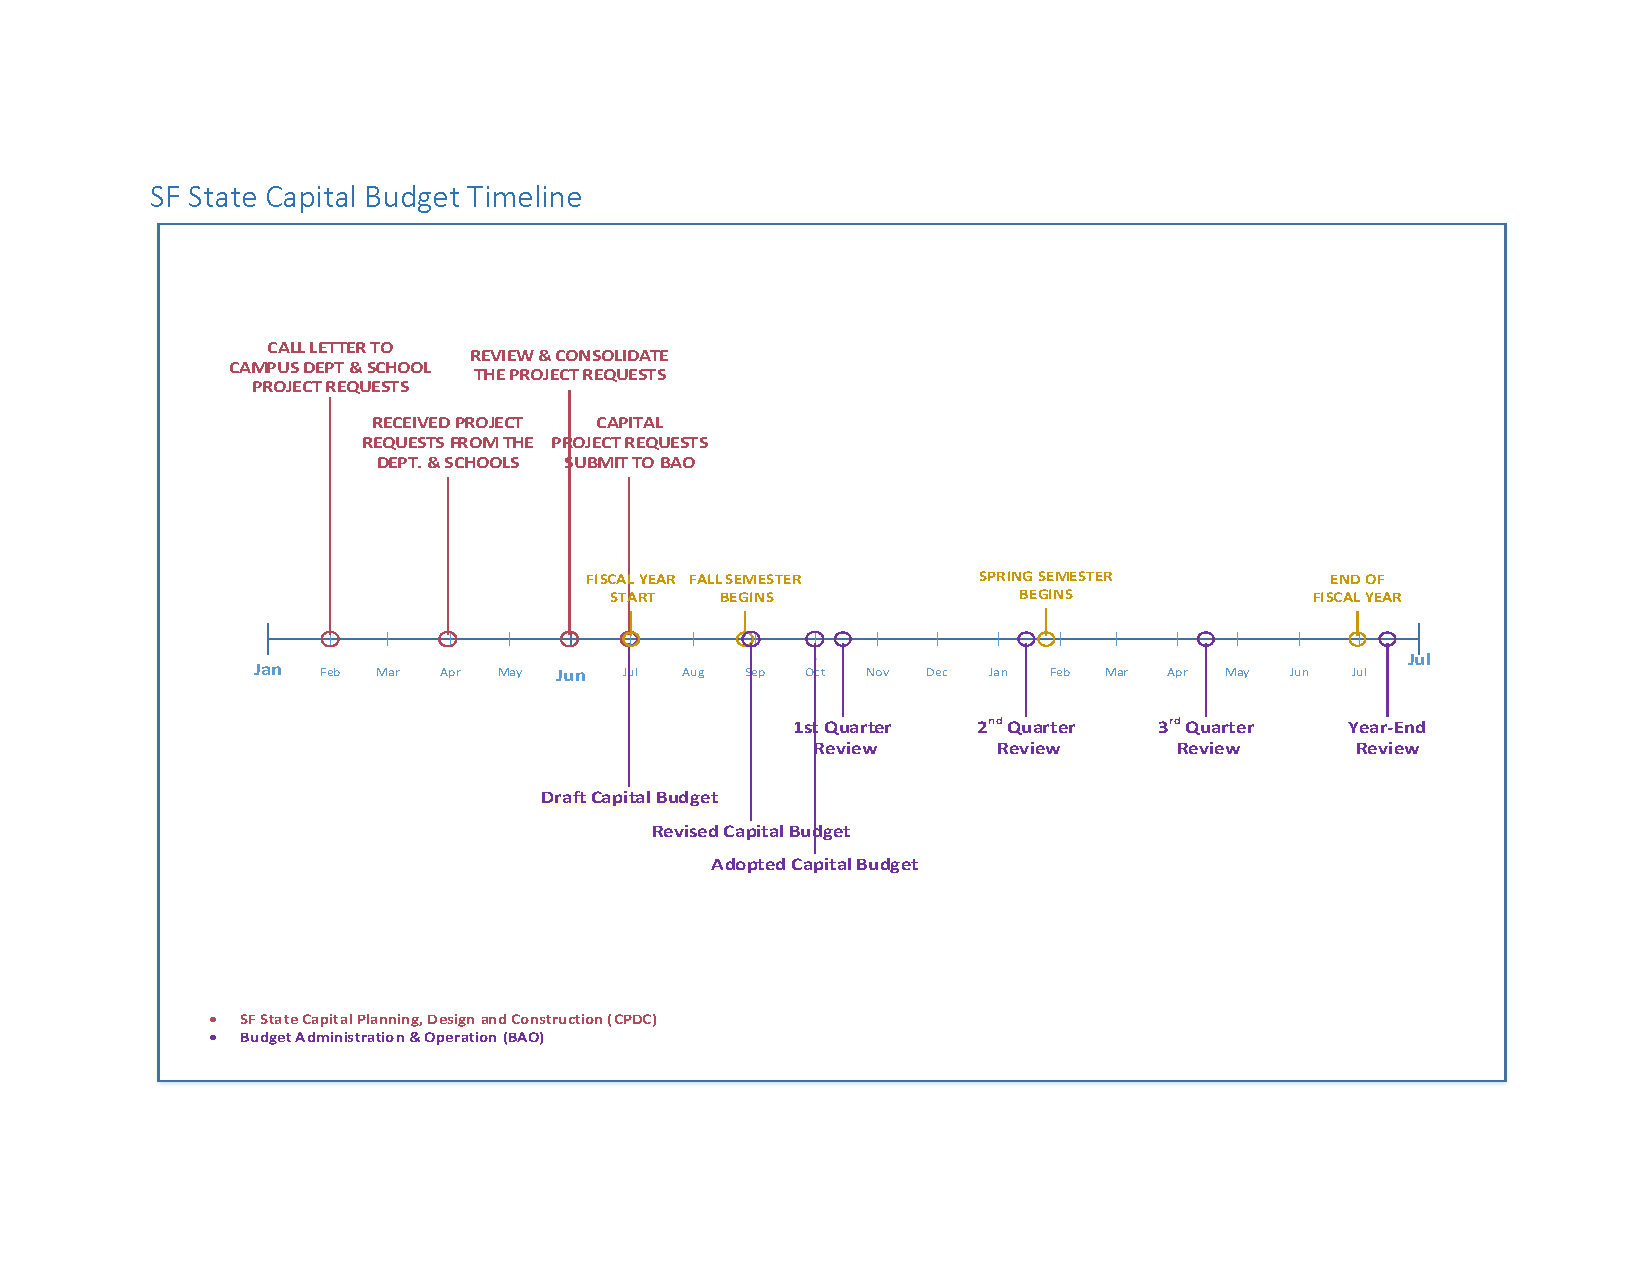 Linear representation of the Capital Budget planning timeline running 19 months from the January prior to a fiscal year start in June to July the following year